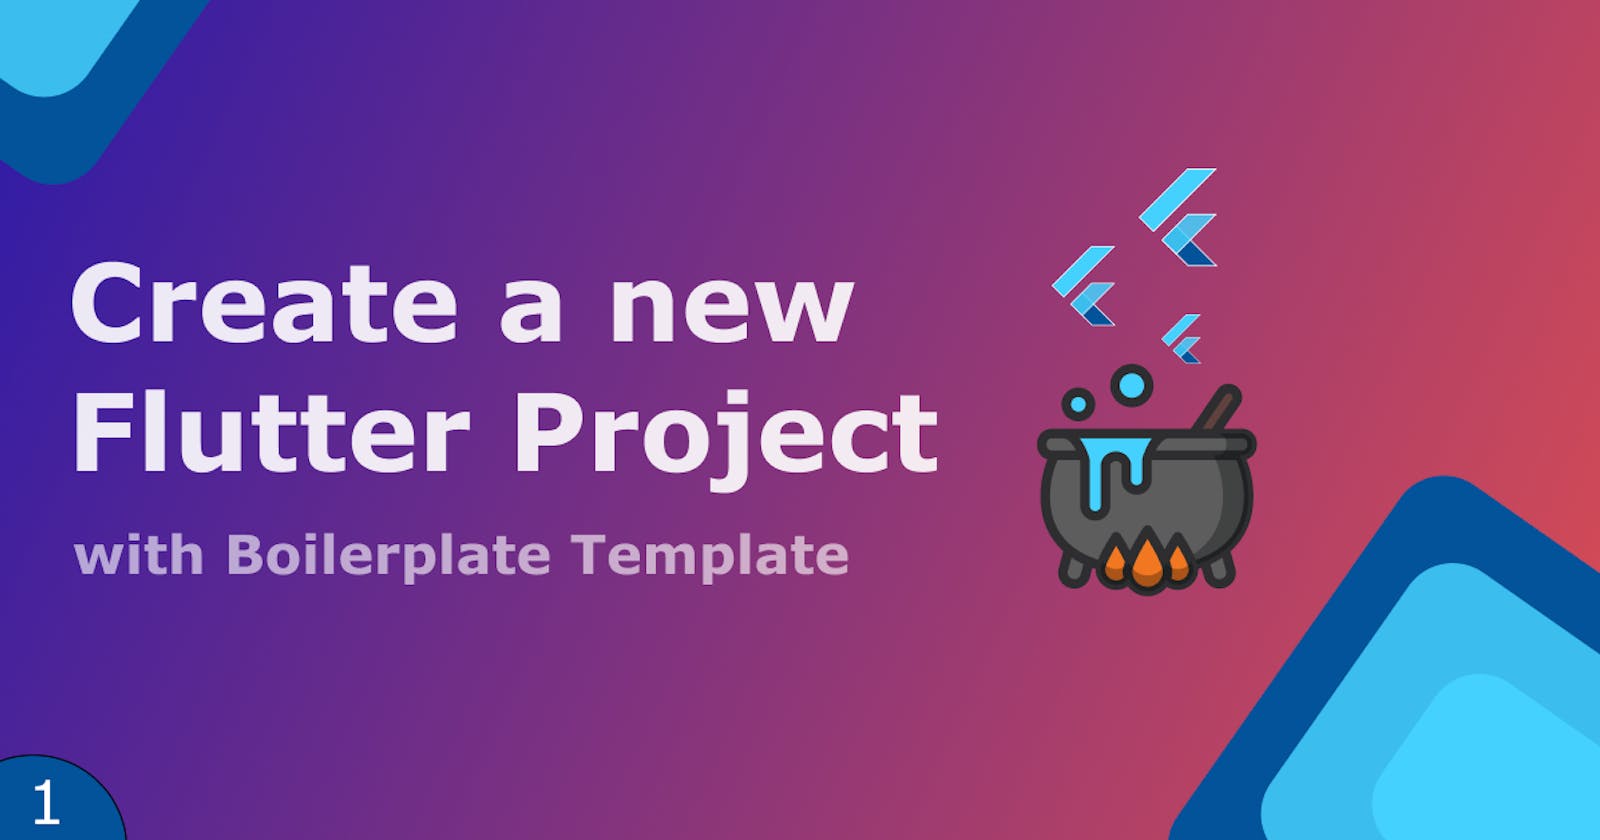 How to create a new Flutter Project with a Boilerplate